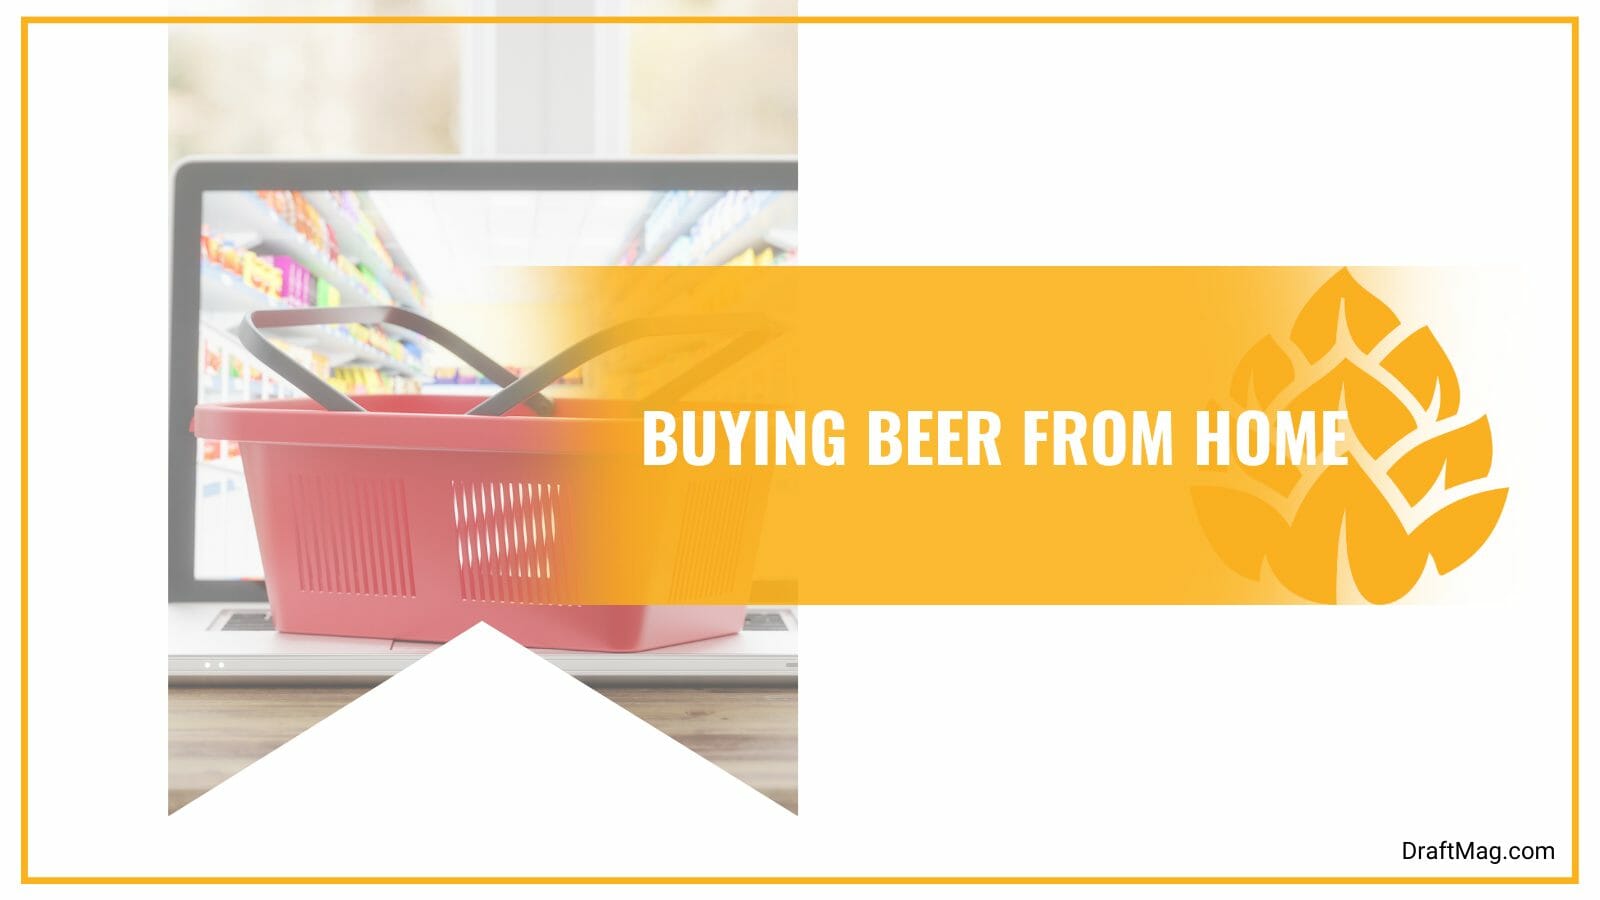 Buying beer from home